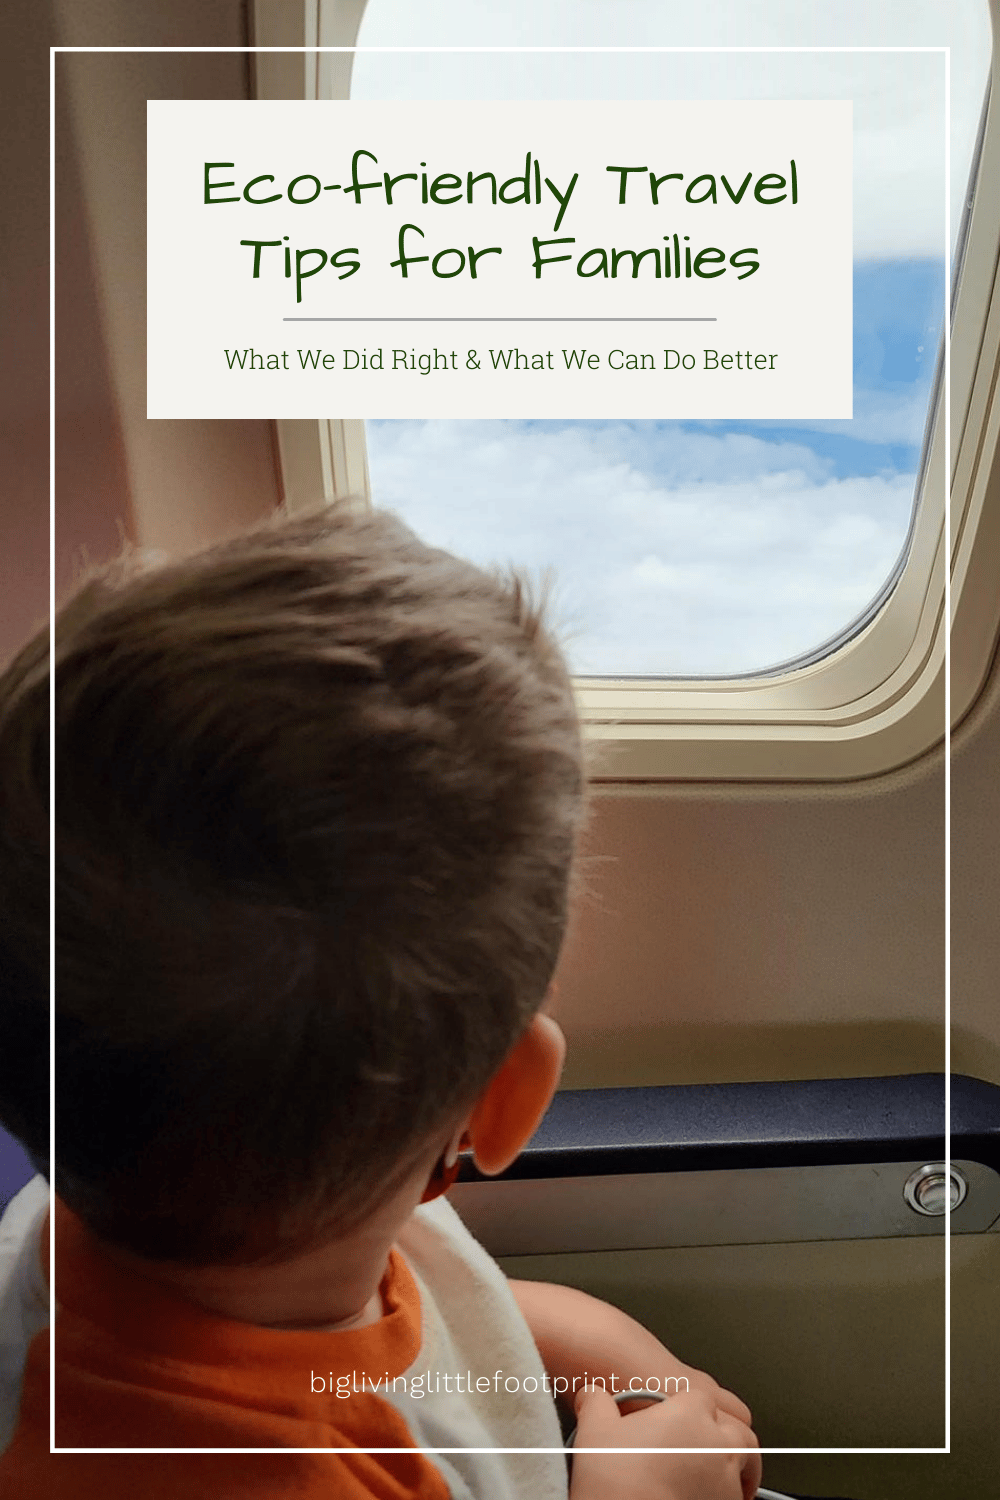 Eco-friendly Travel Tips For Families